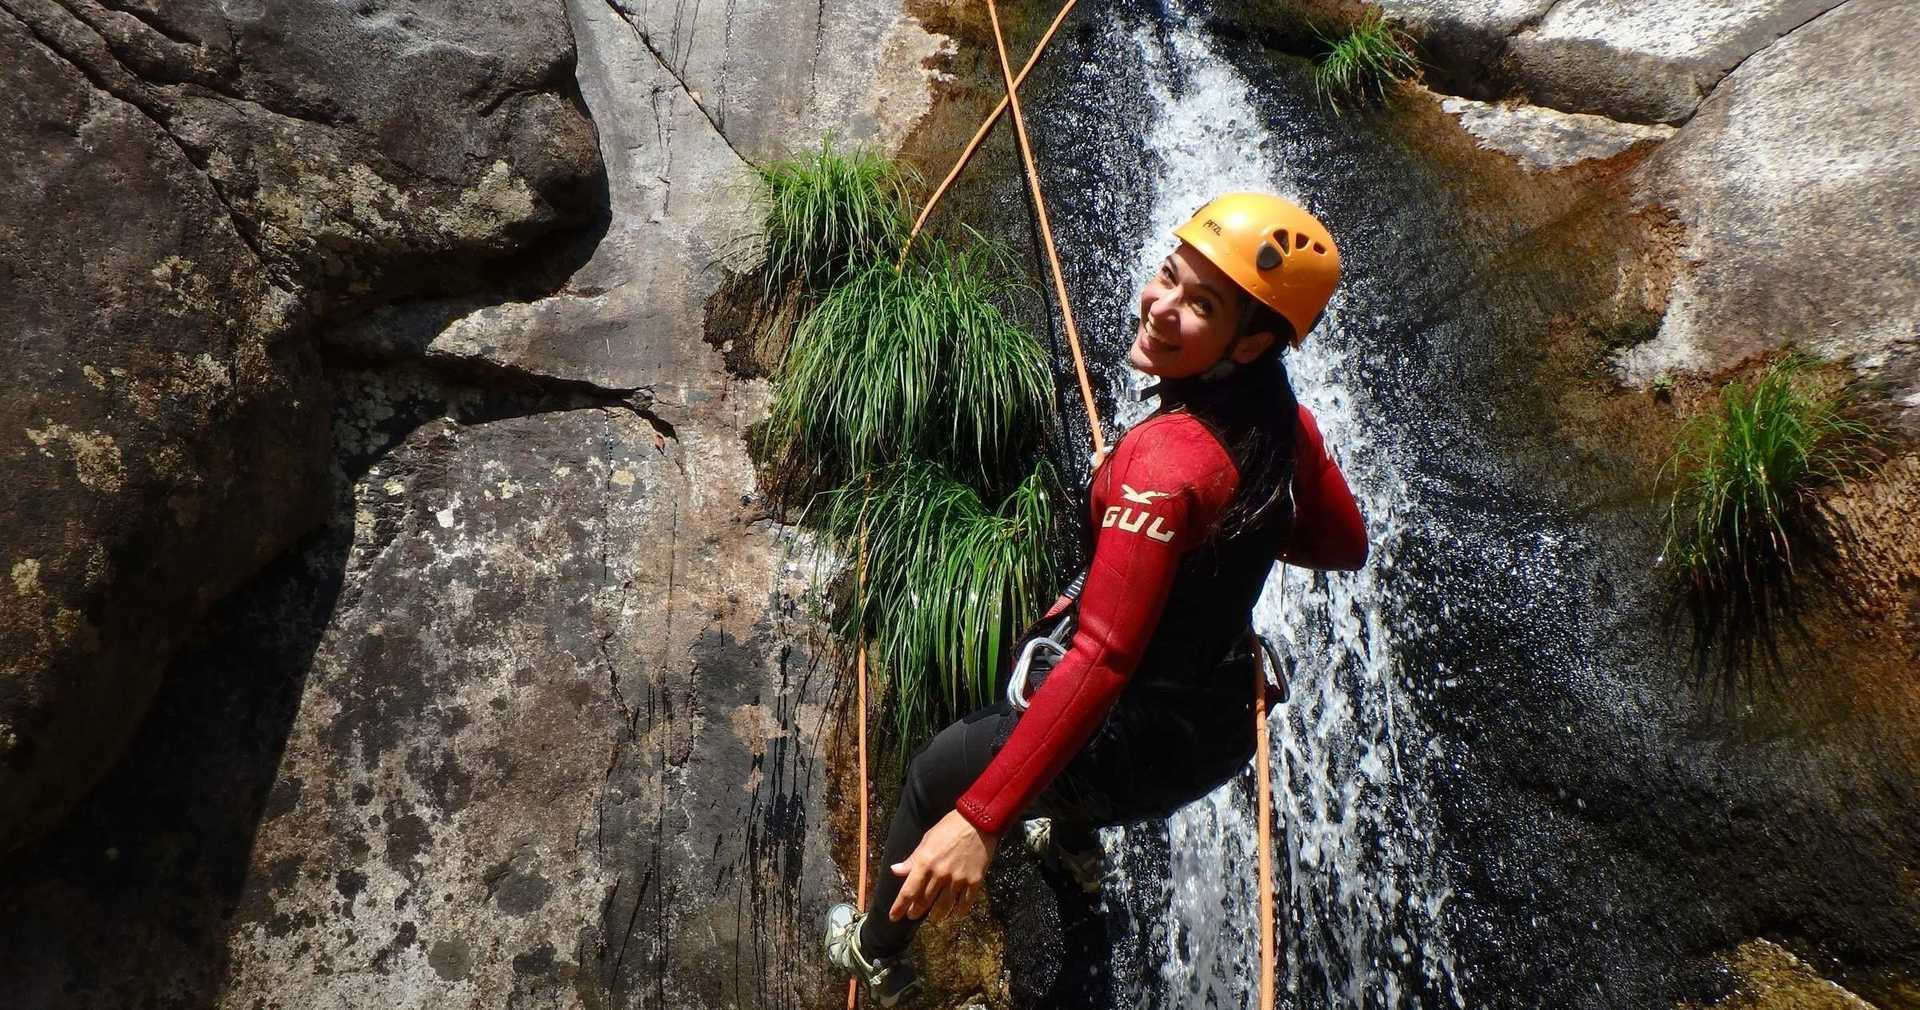 Canyoning in Ger√™s